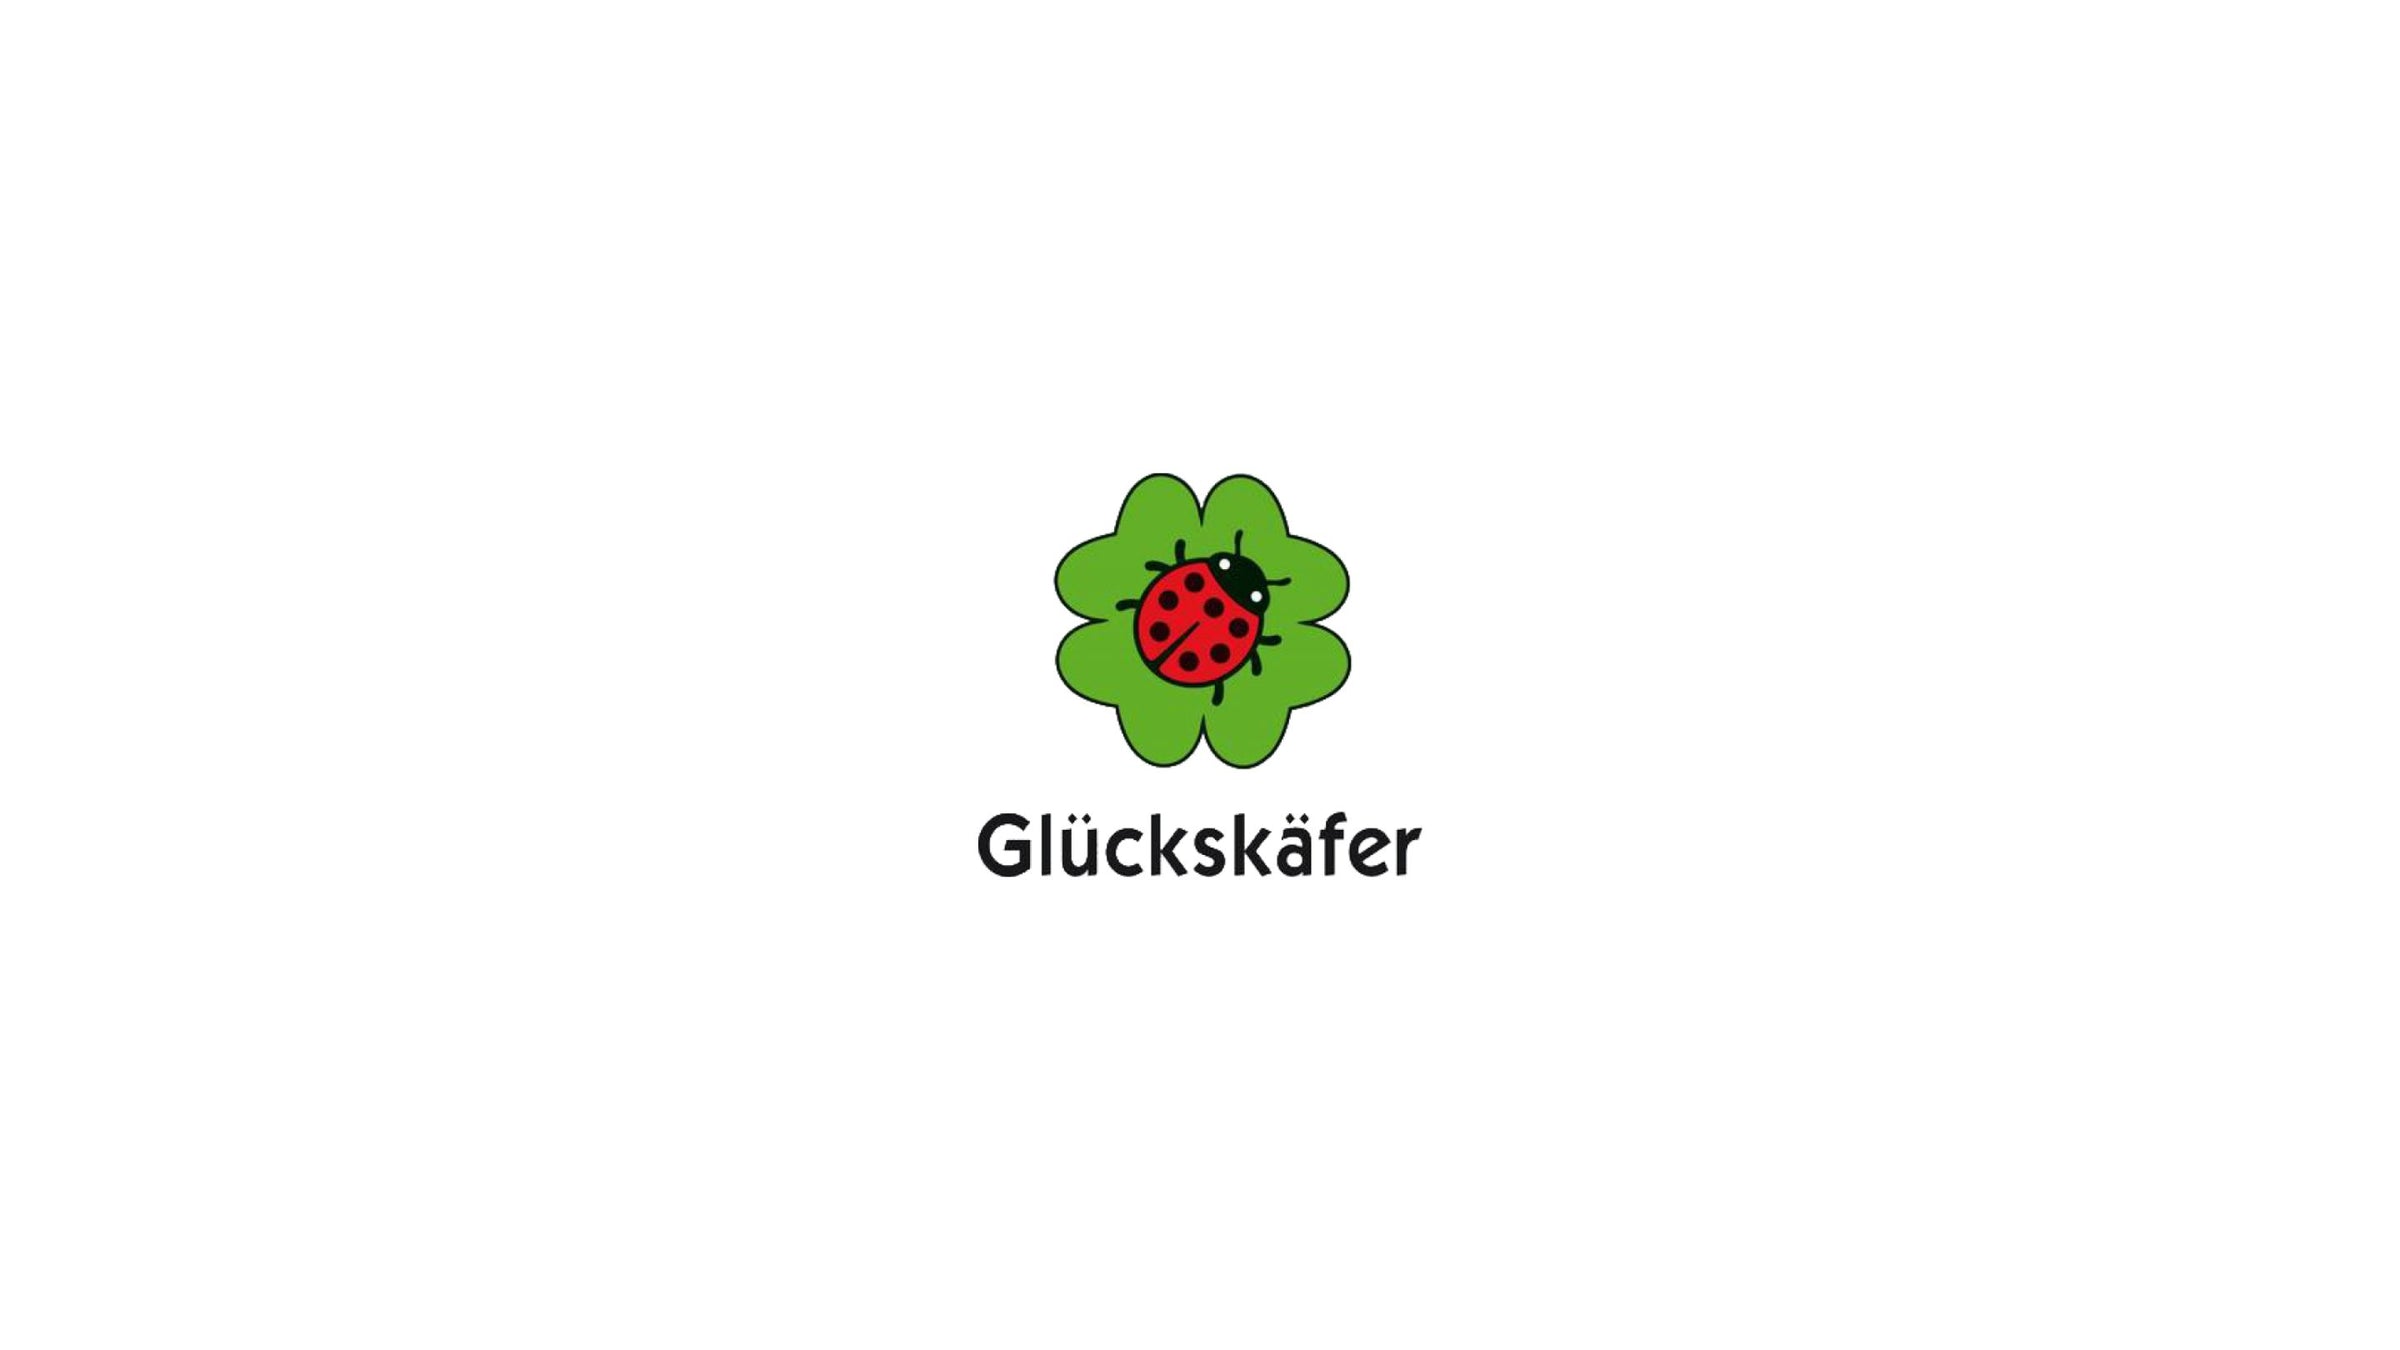 gluckskafer in bold black text with a clover leaf and ladybird